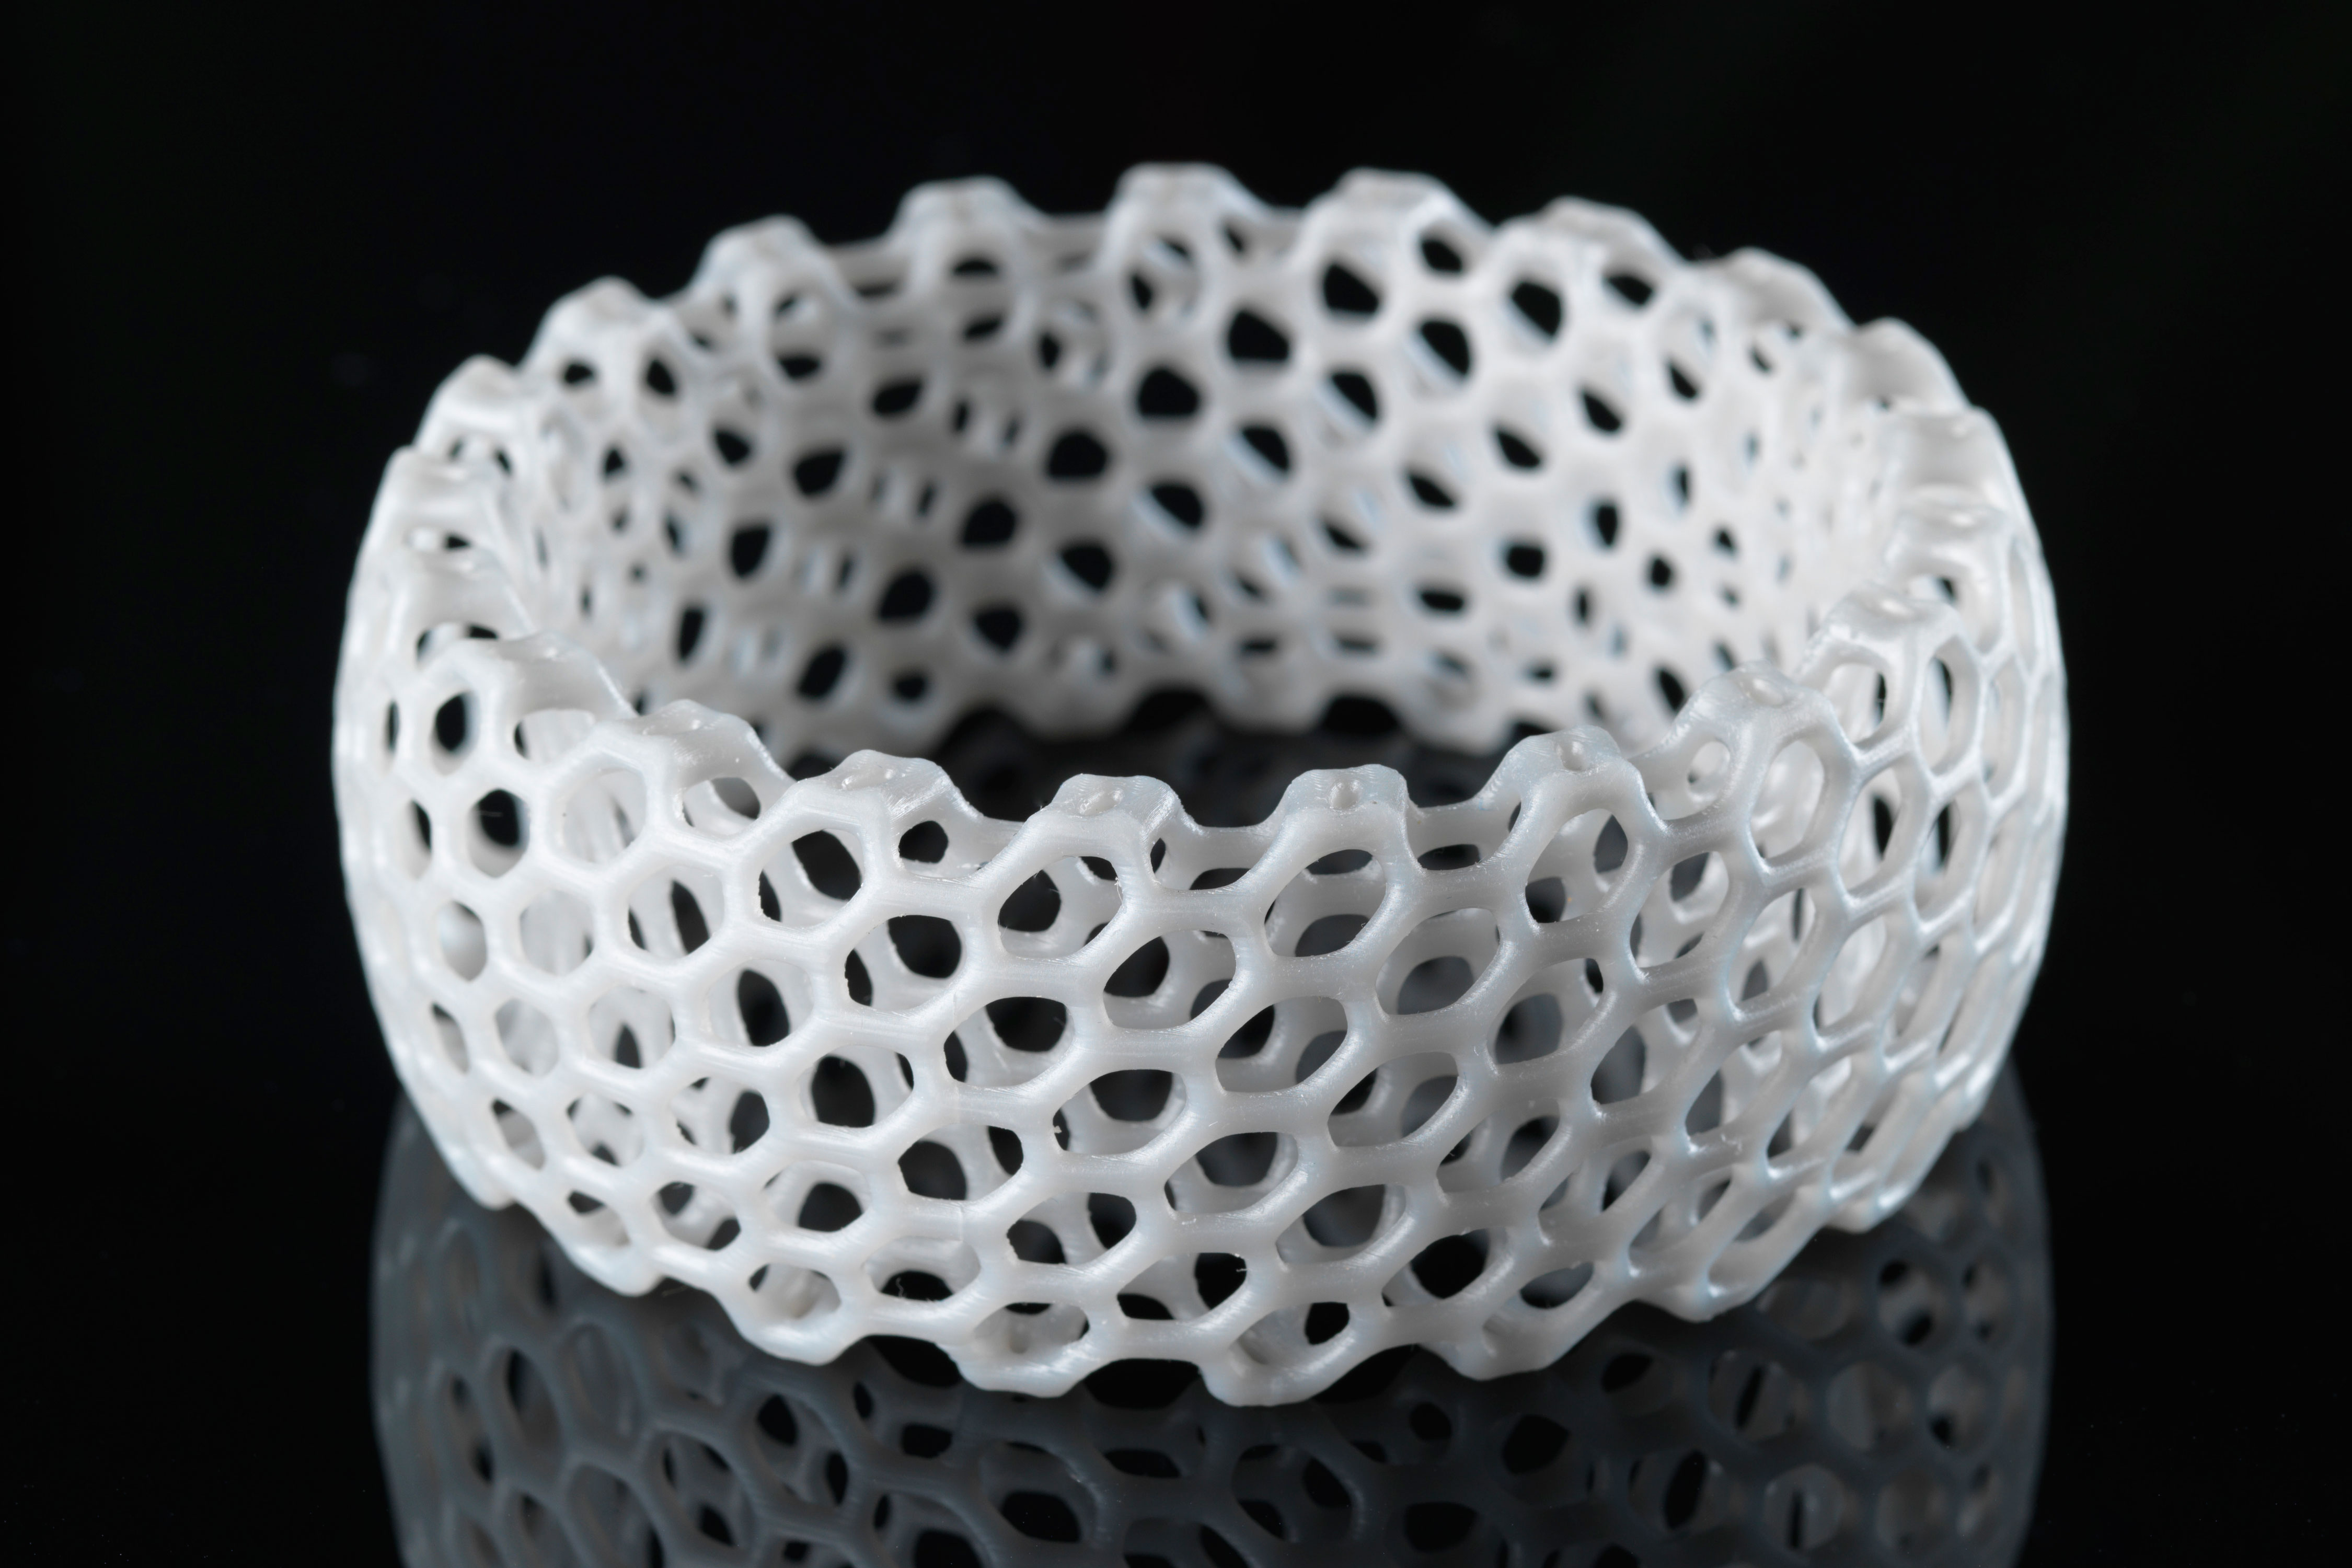 Buy 3d Printed Objects For Giving As Gifts Or Personal Uses Sayli Mehata